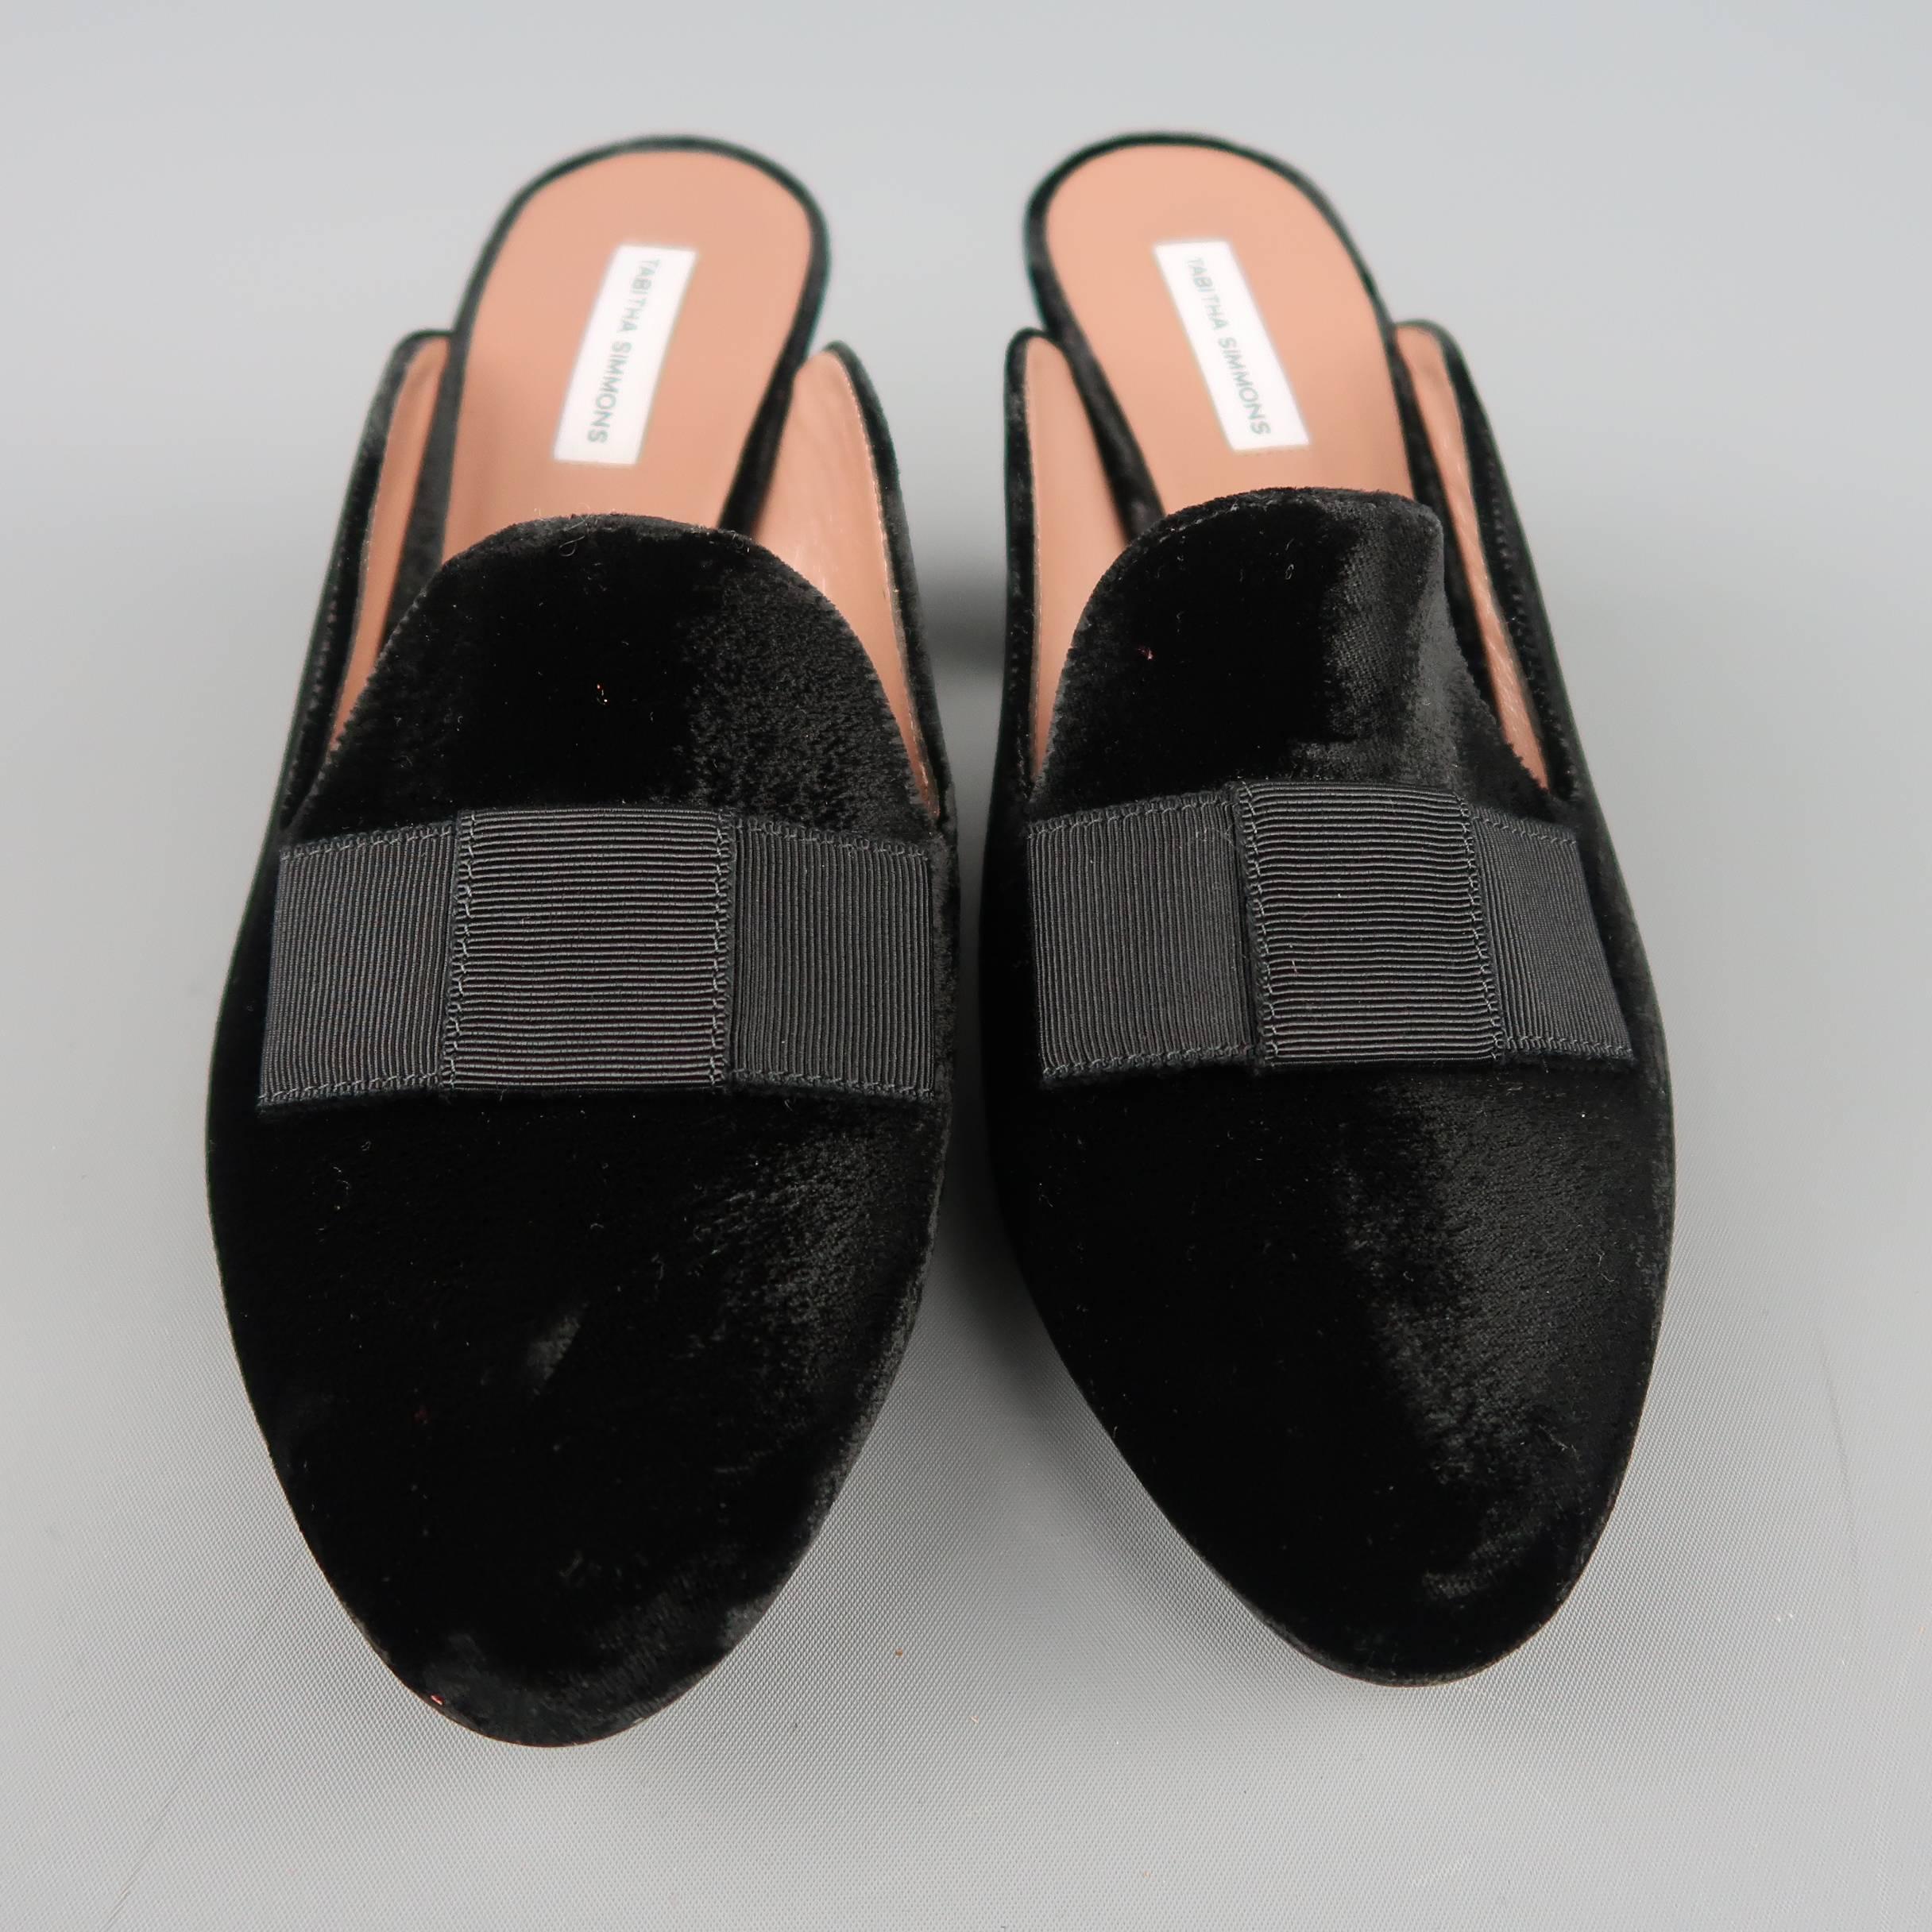 TABITHA SIMMONS mules come in black velvet with a grosgrain ribbon bow and chunky covered heel. Never worn. Made in Italy.
 
New without Tags.
Marked: IT 40
 
Measurements:
 
Heel: 3.45 in.
